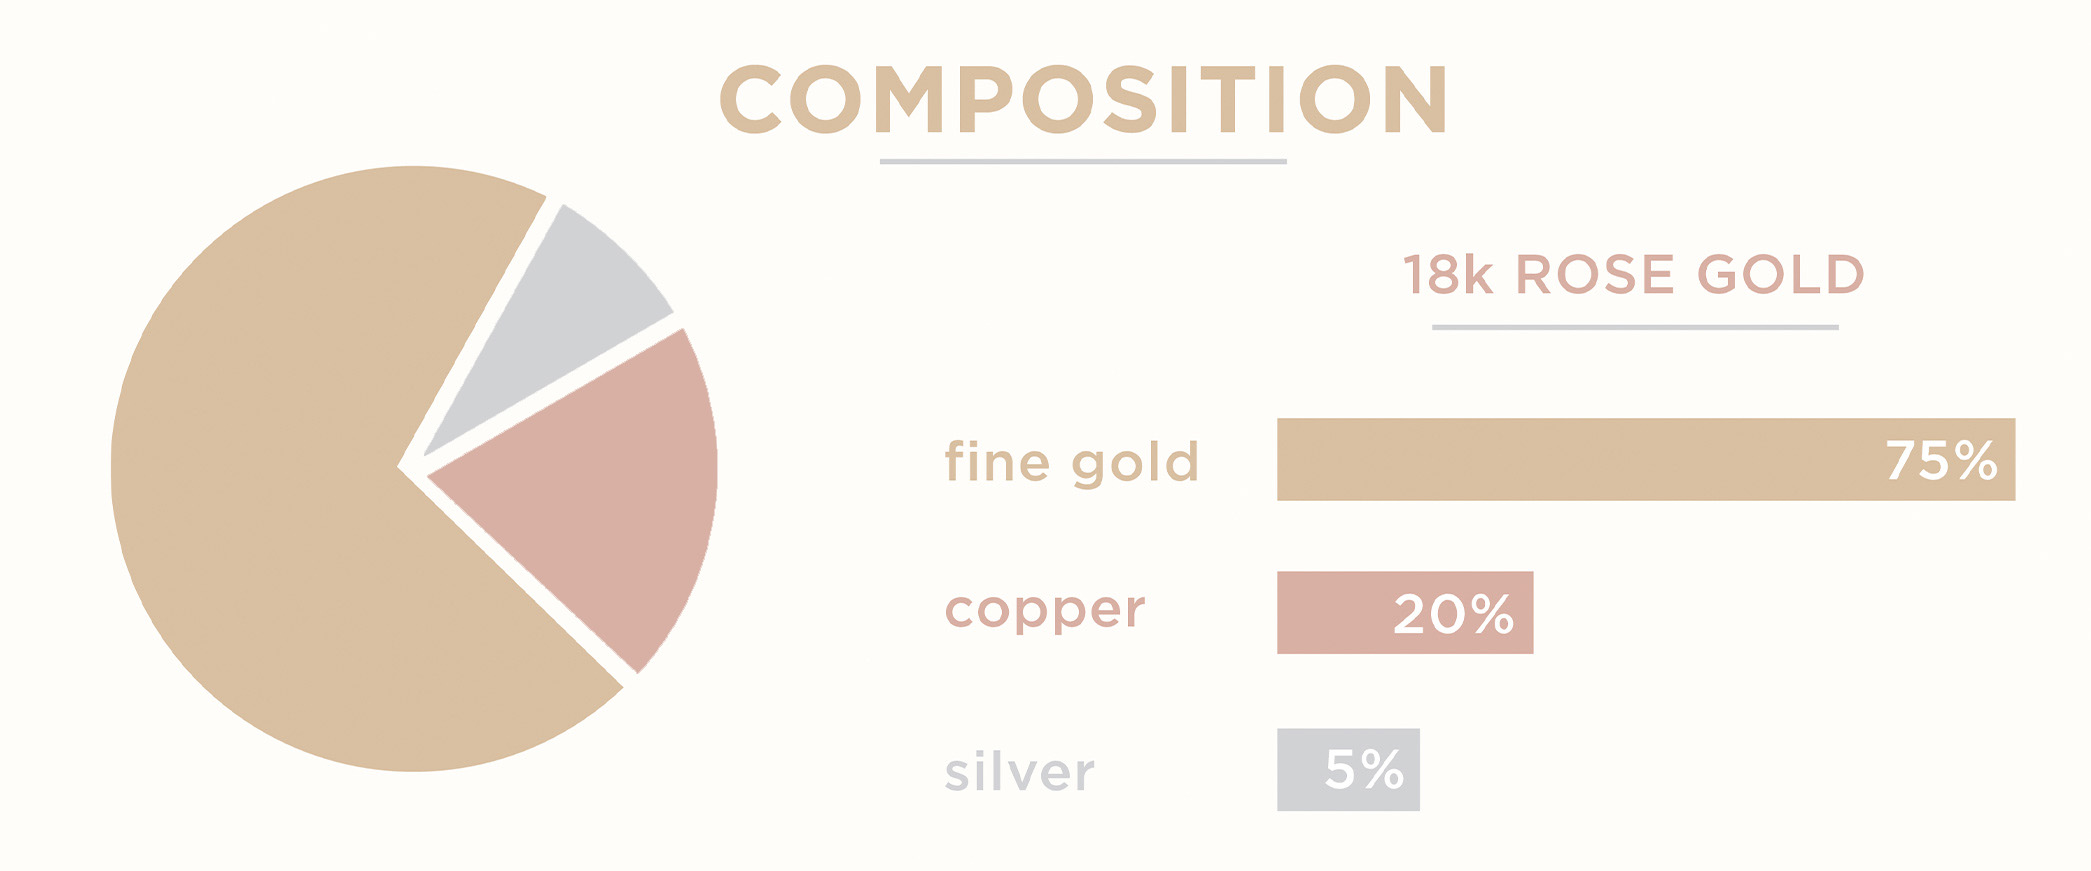 A chart showing the composition of rose gold